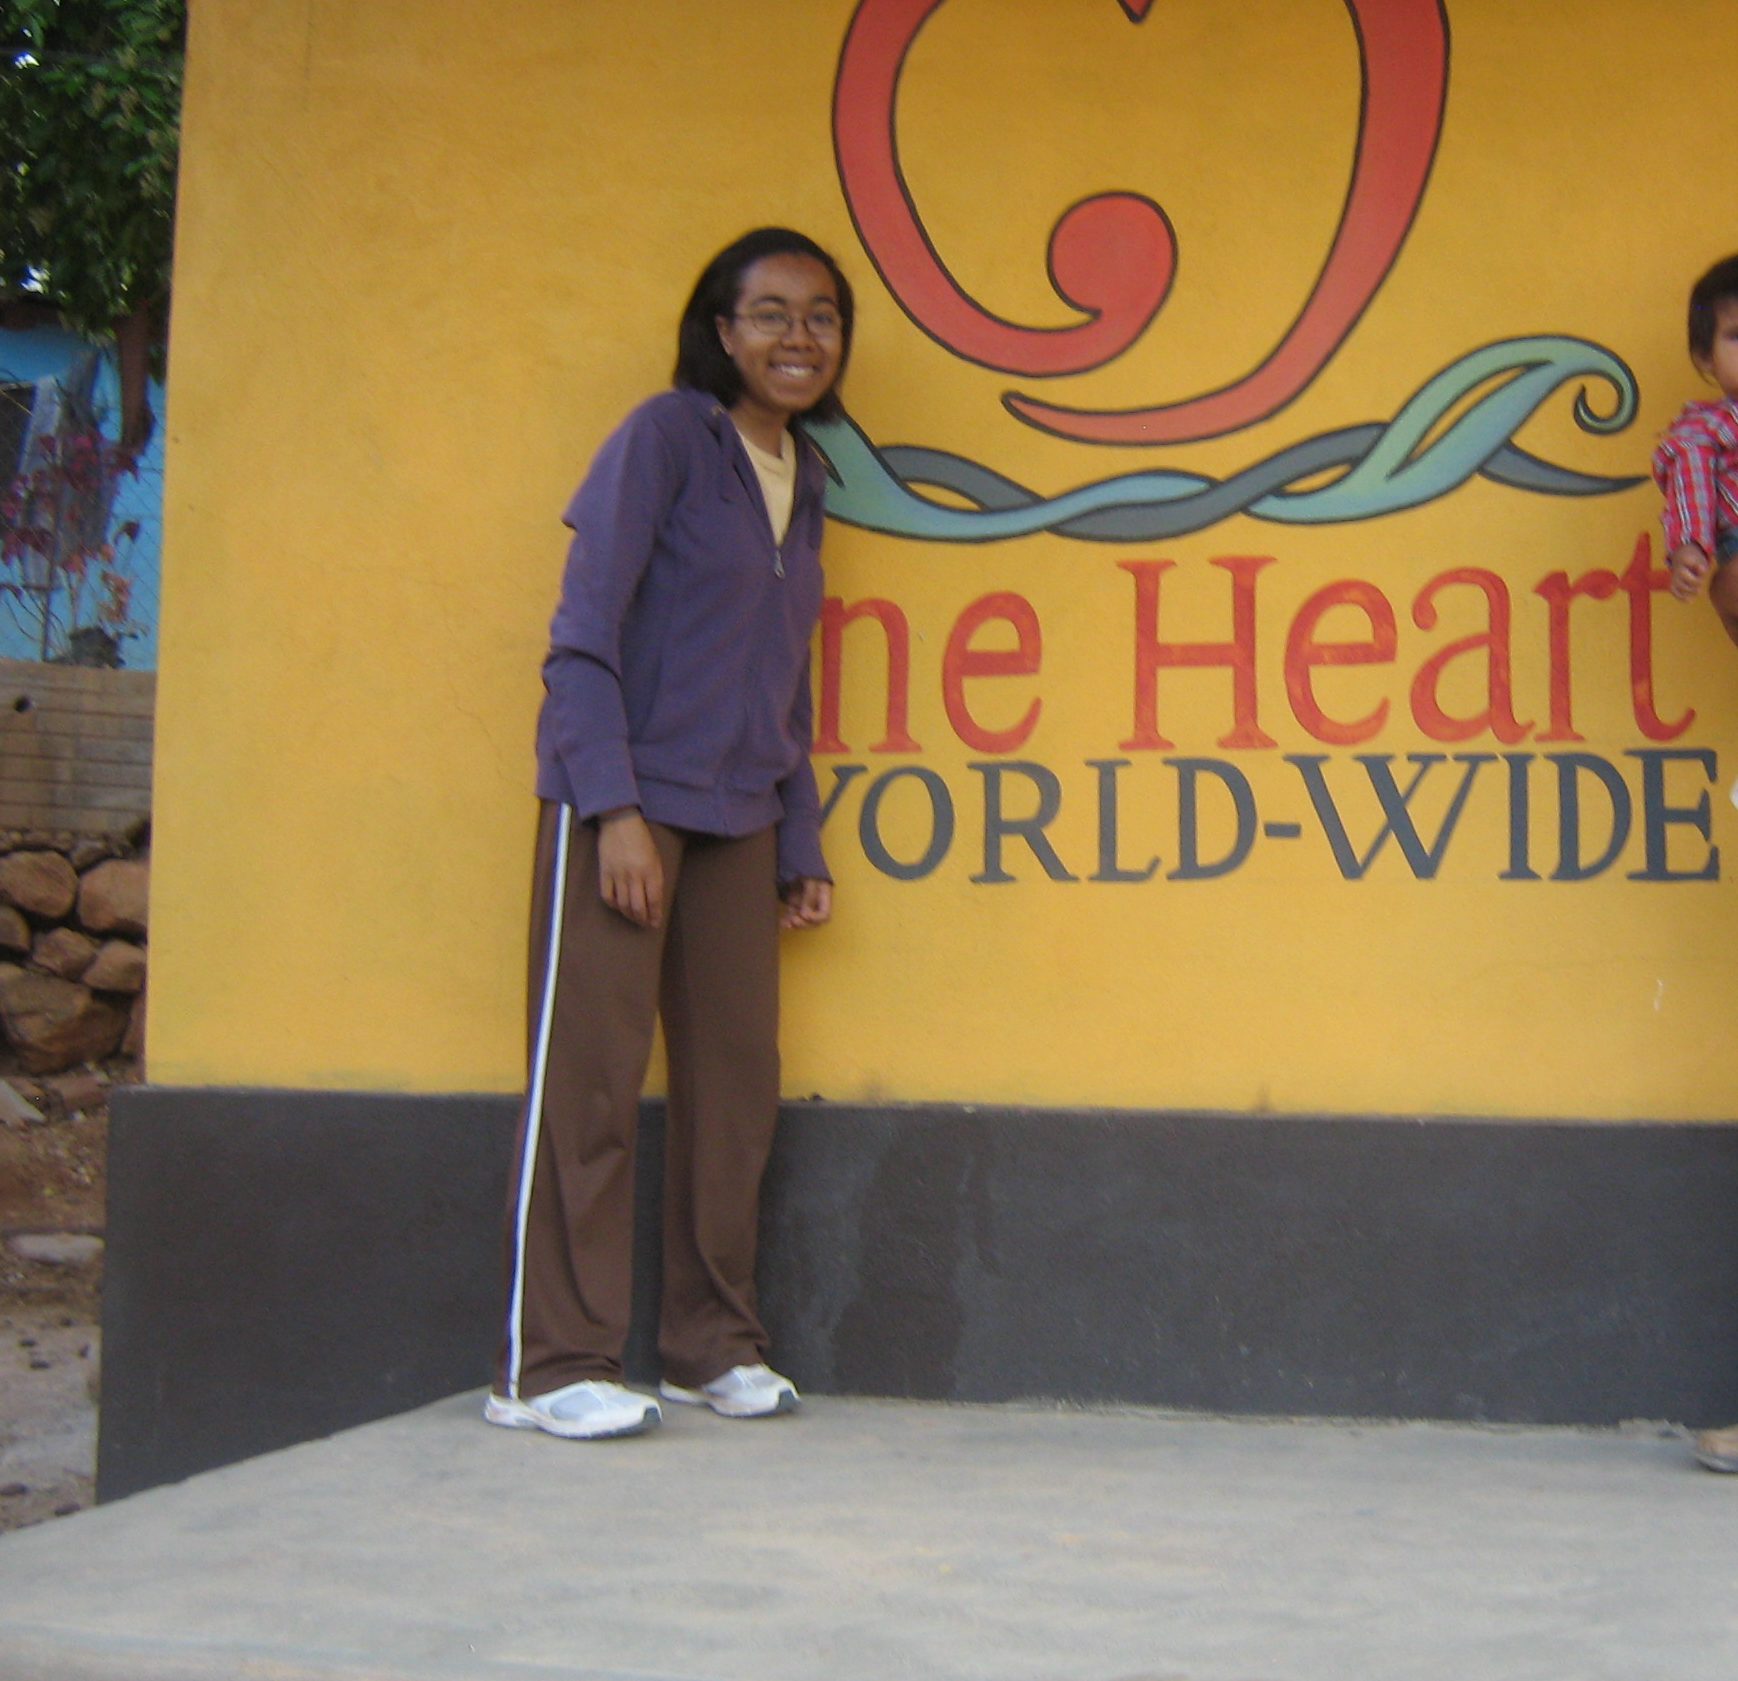 One Heart World-Wide, Urique Mexico